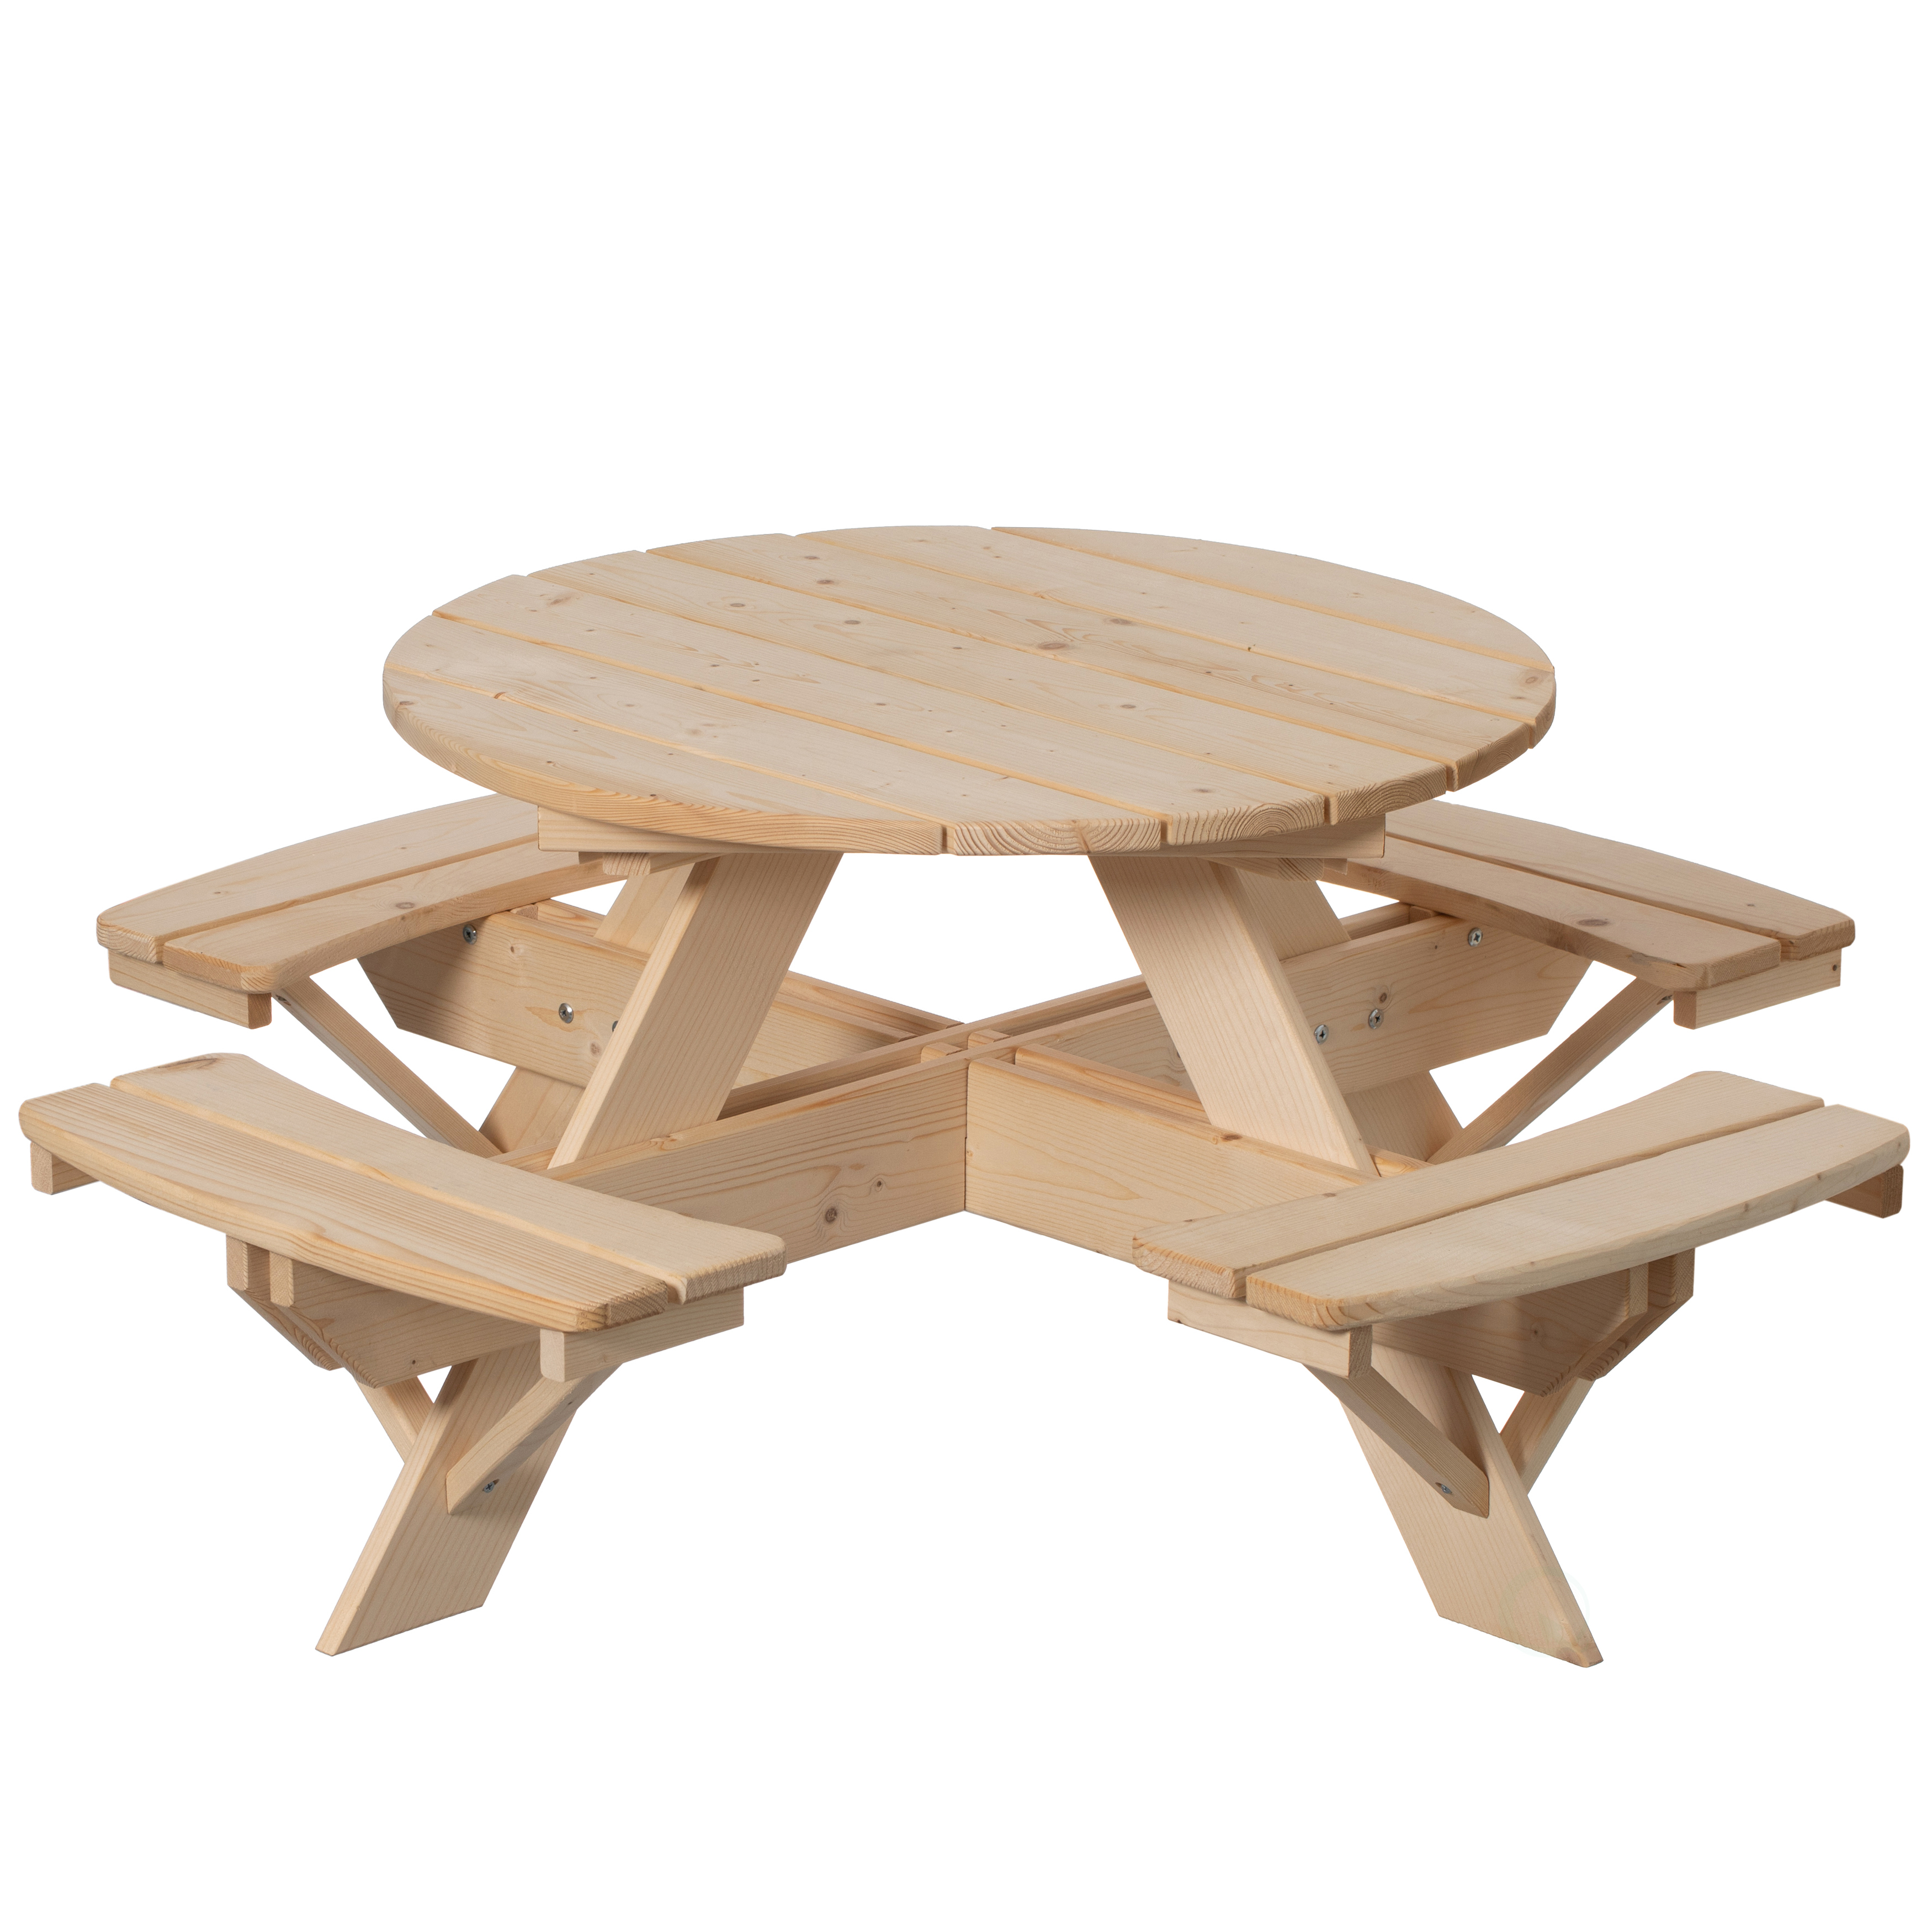 Wooden Kids Round Picnic Table Bench, Outdoor Children's Backyard Table, Crafting, Dining, And Playtime Patio Table